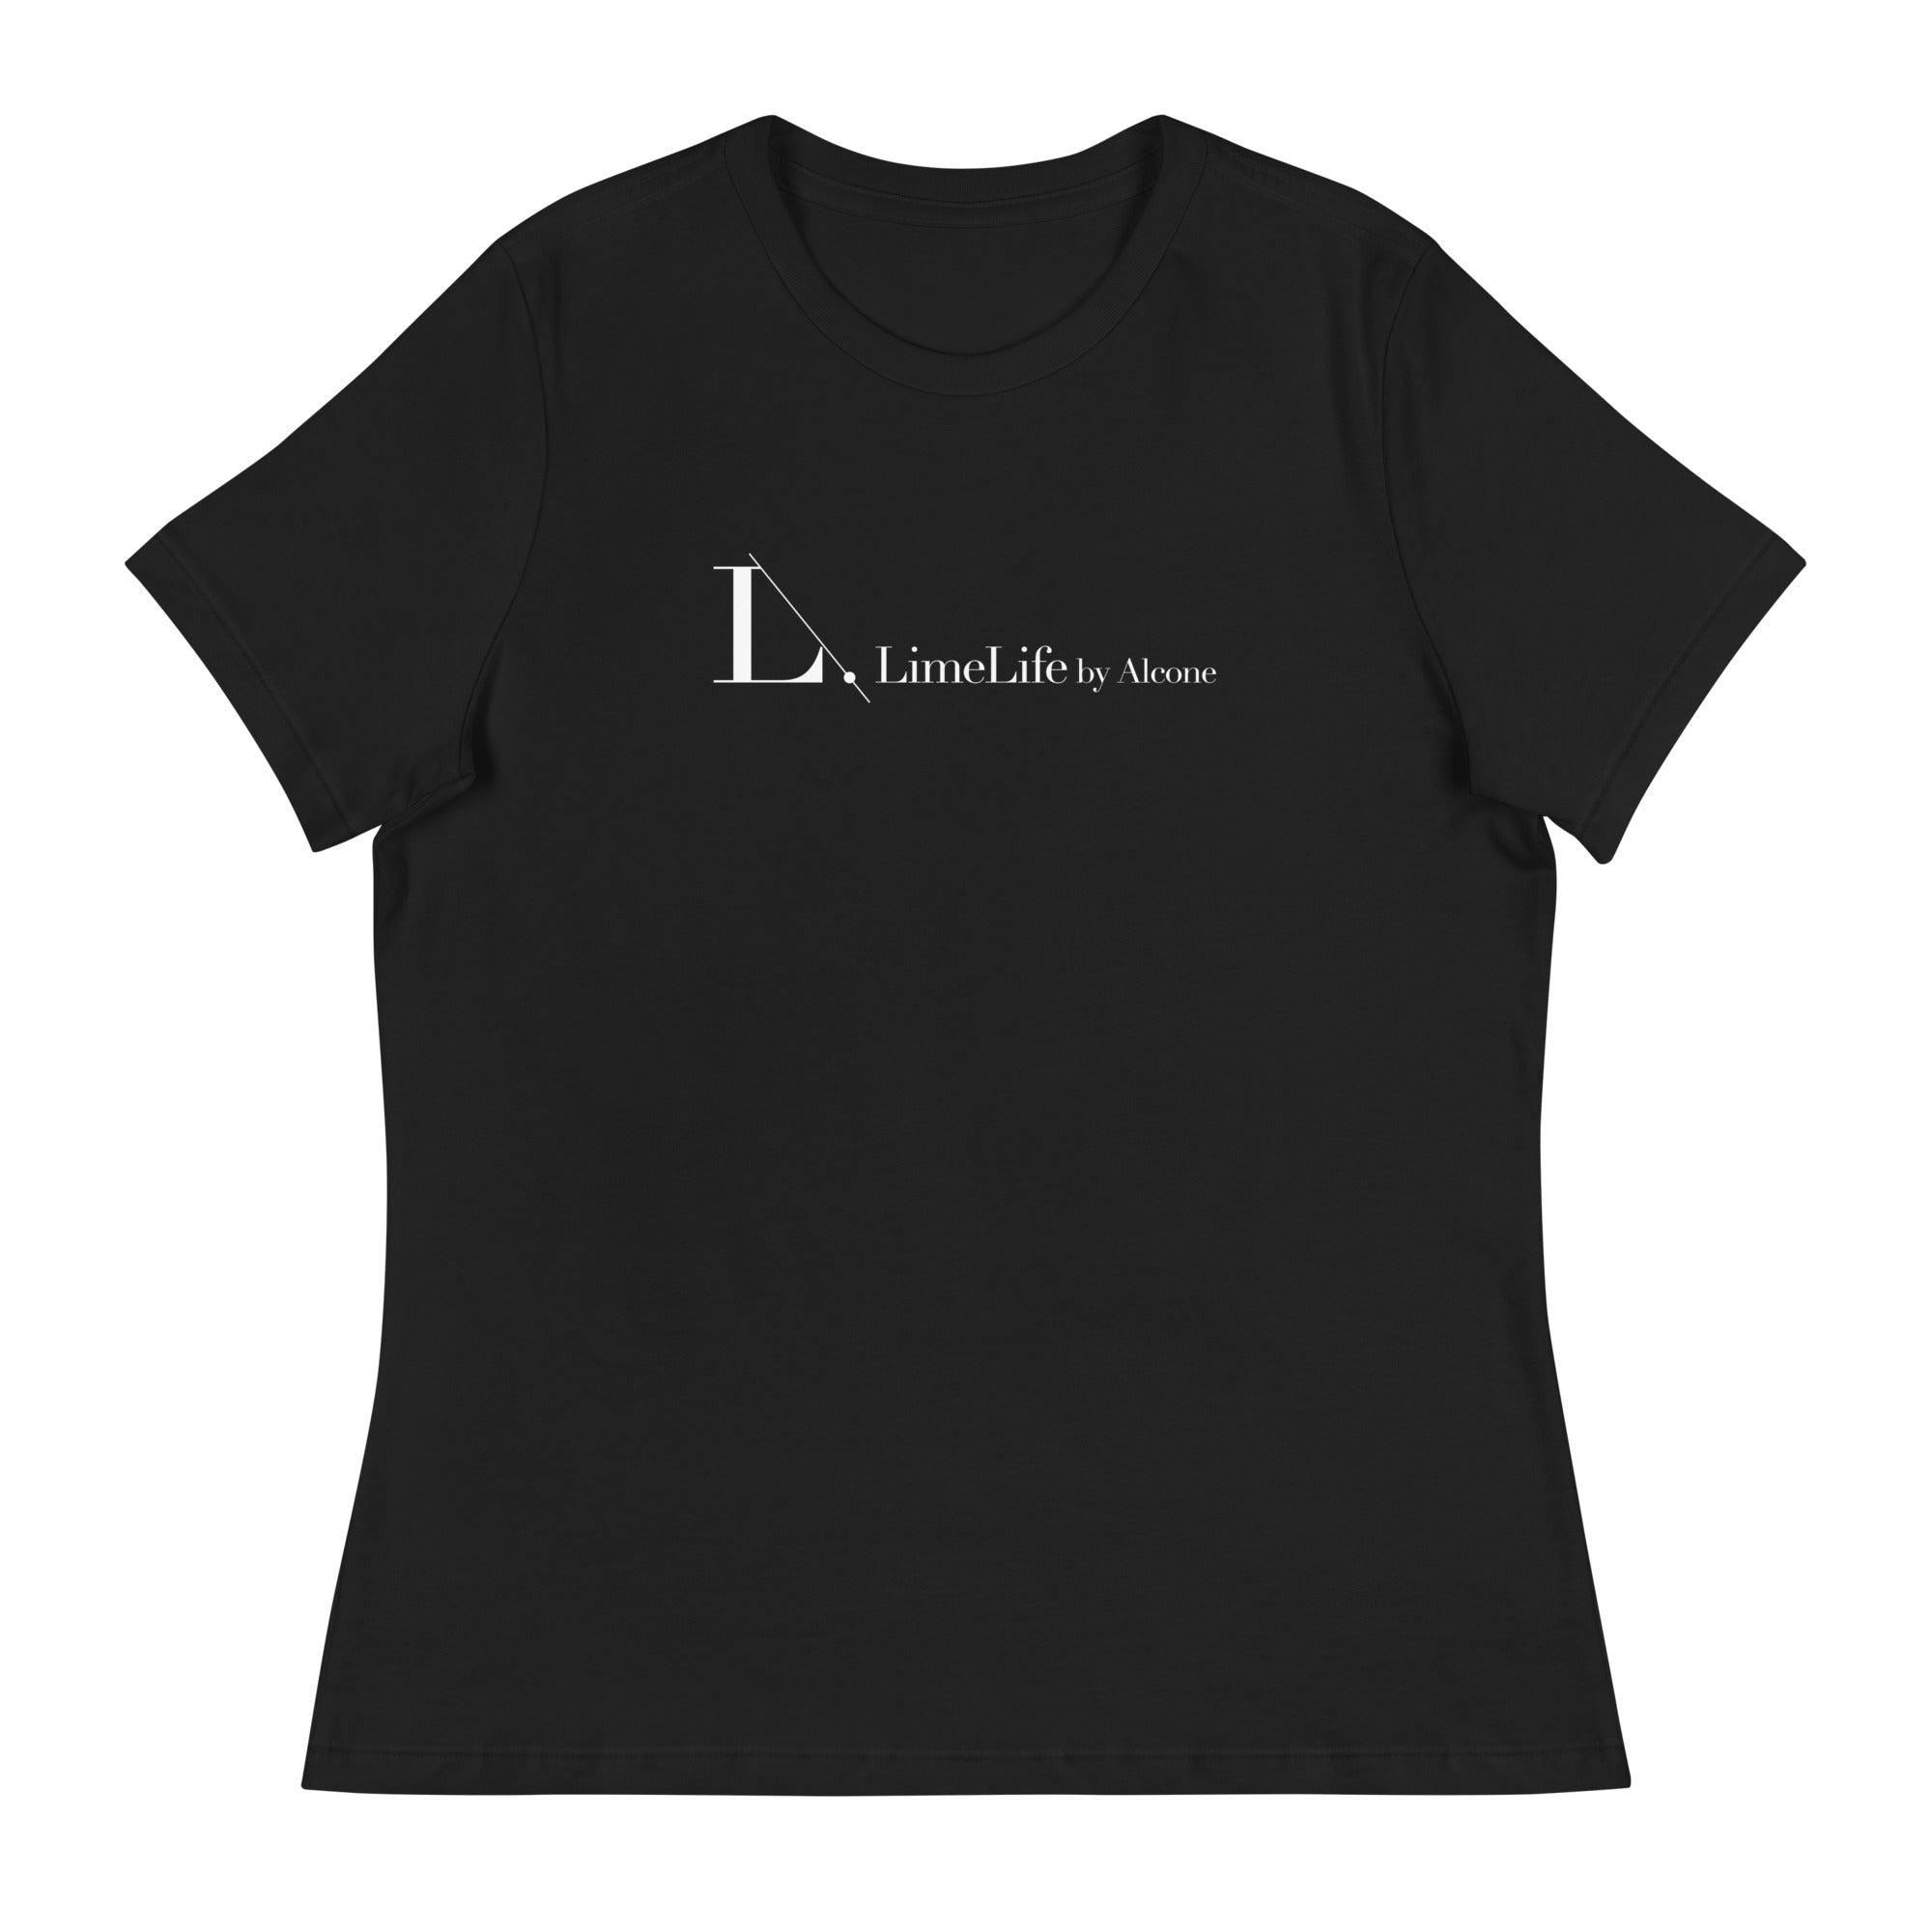 LimeLife by Alcone - Women's Relaxed T-Shirt in "LIMITED EDITION PINK" and black